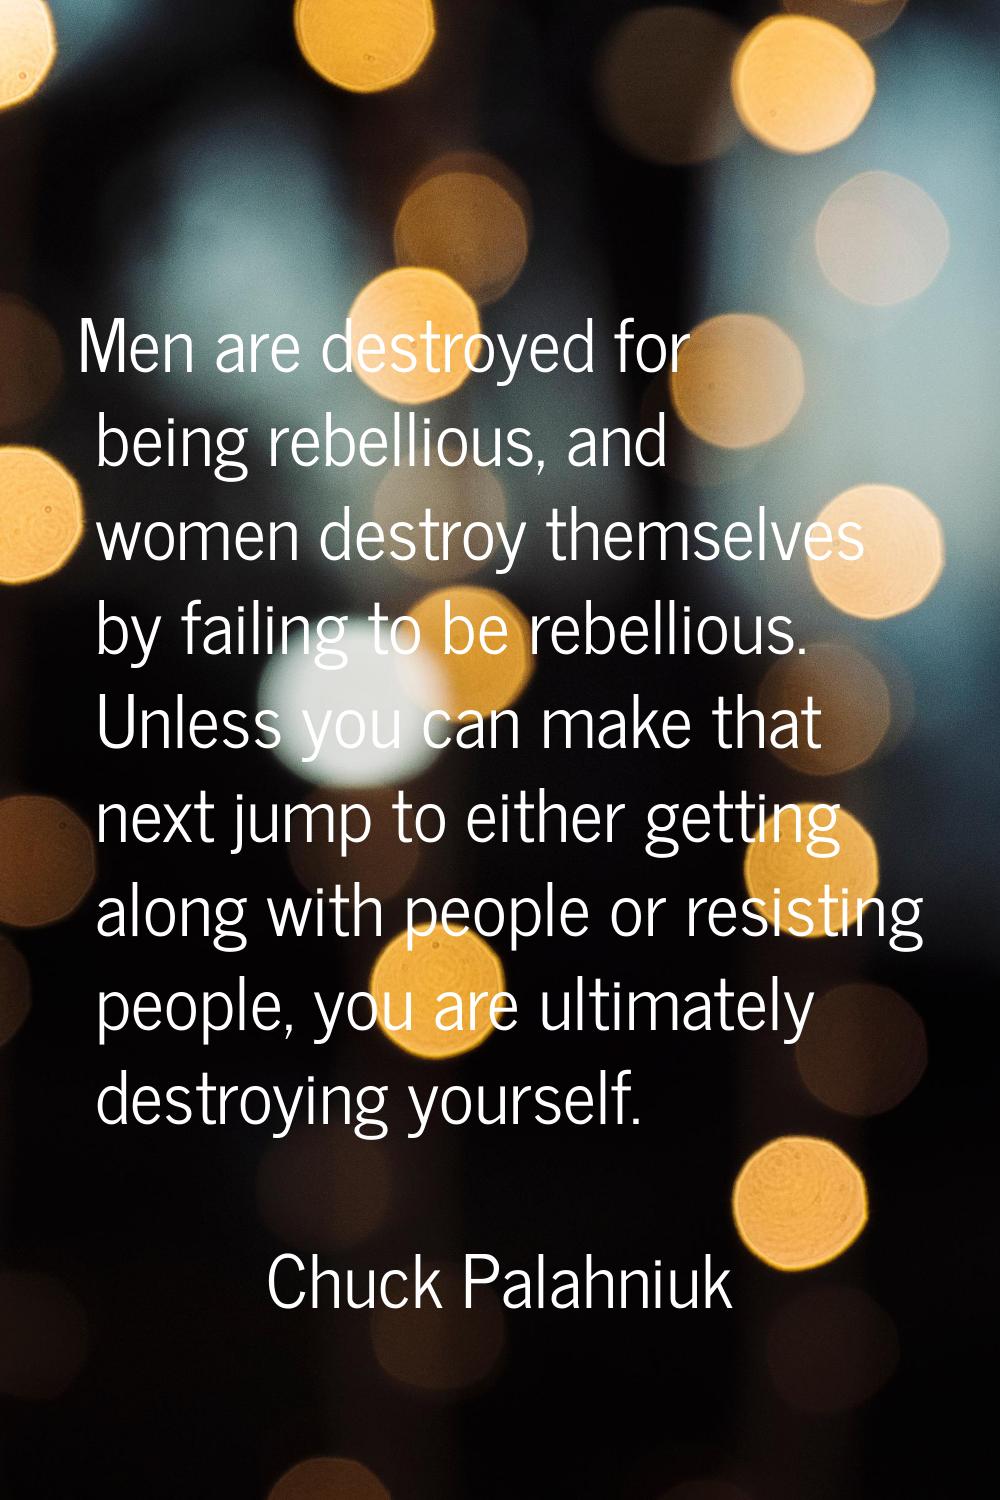 Men are destroyed for being rebellious, and women destroy themselves by failing to be rebellious. U